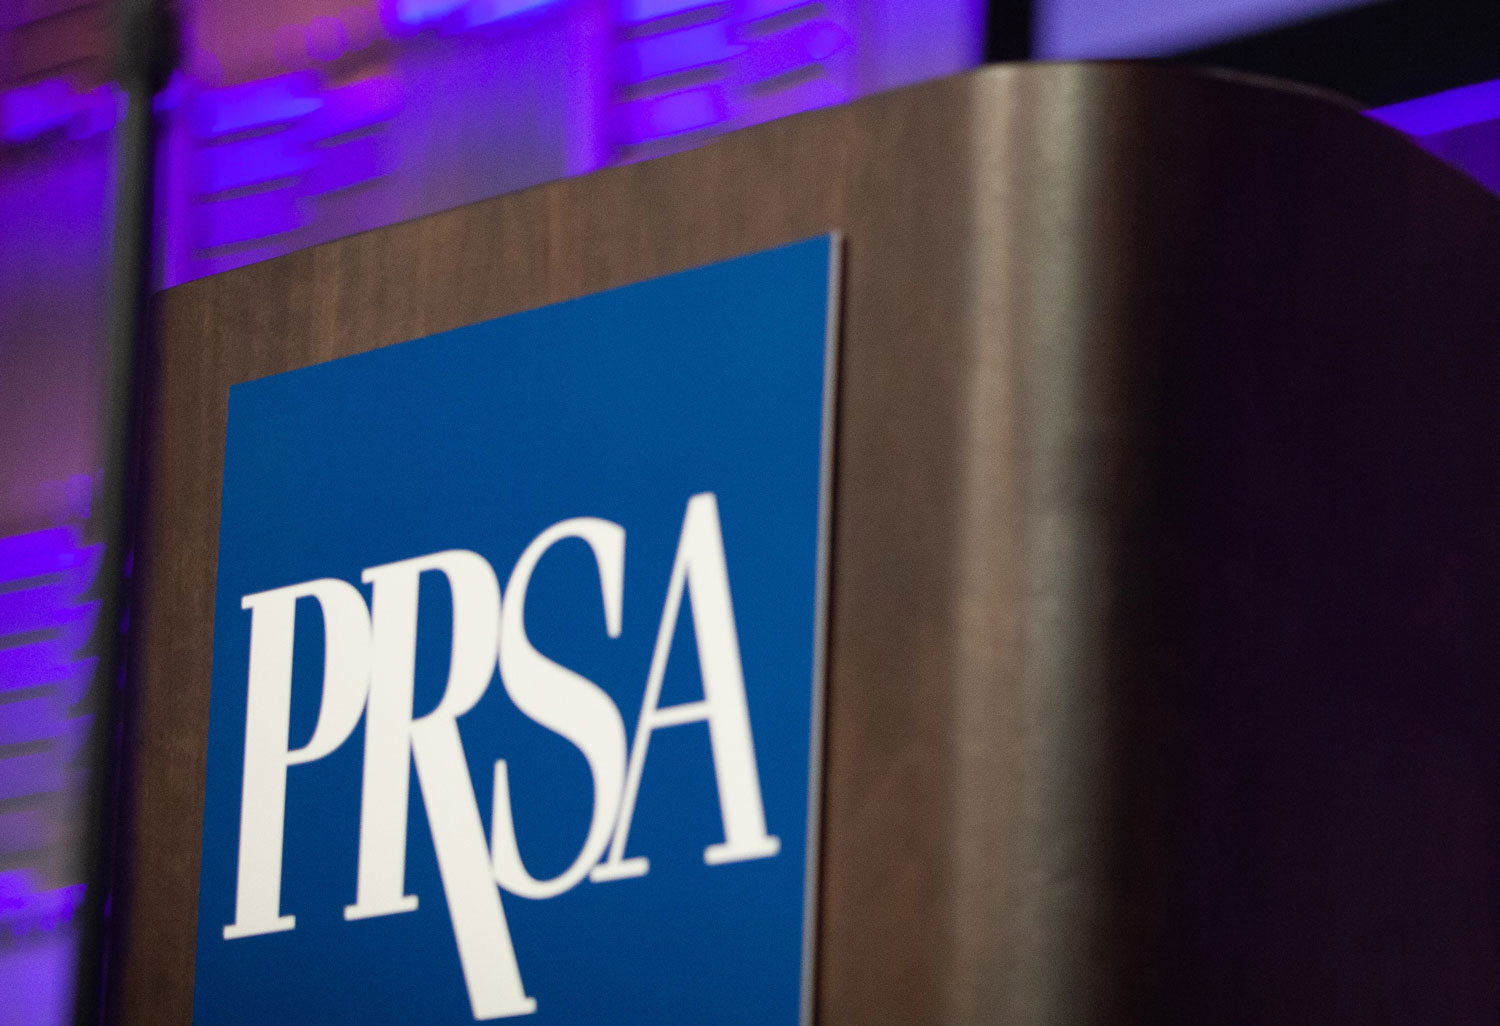 PRSA Leadership Commits to Improvements in Diversity, Equity and